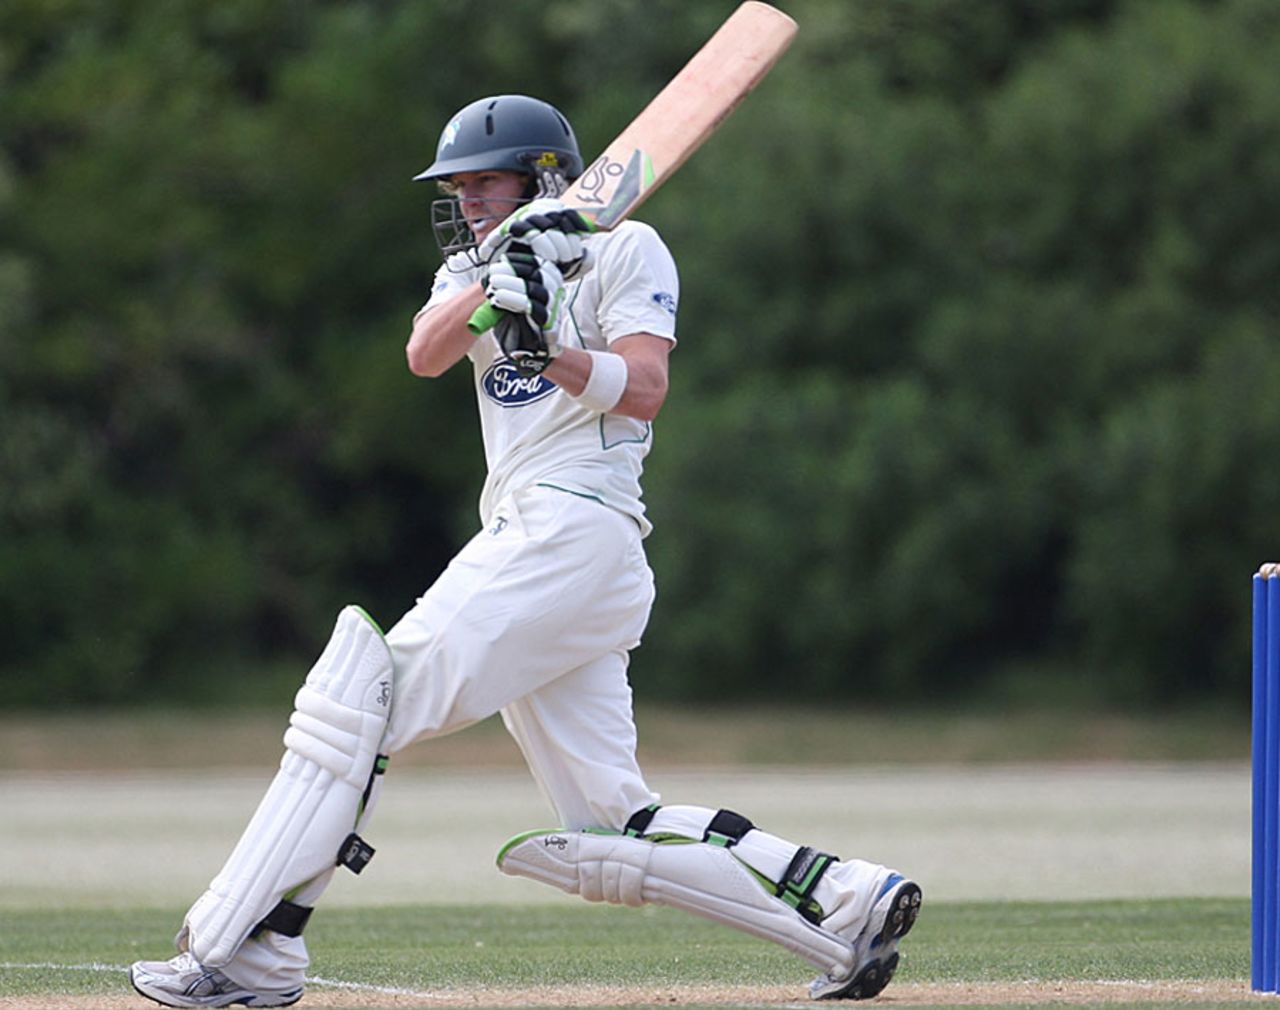 Tim Weston scored a century in the first innings to set up a win for Central Districts, Auckland v Central Districts, Plunket Shield, Auckland, 4th day, November 26, 2010